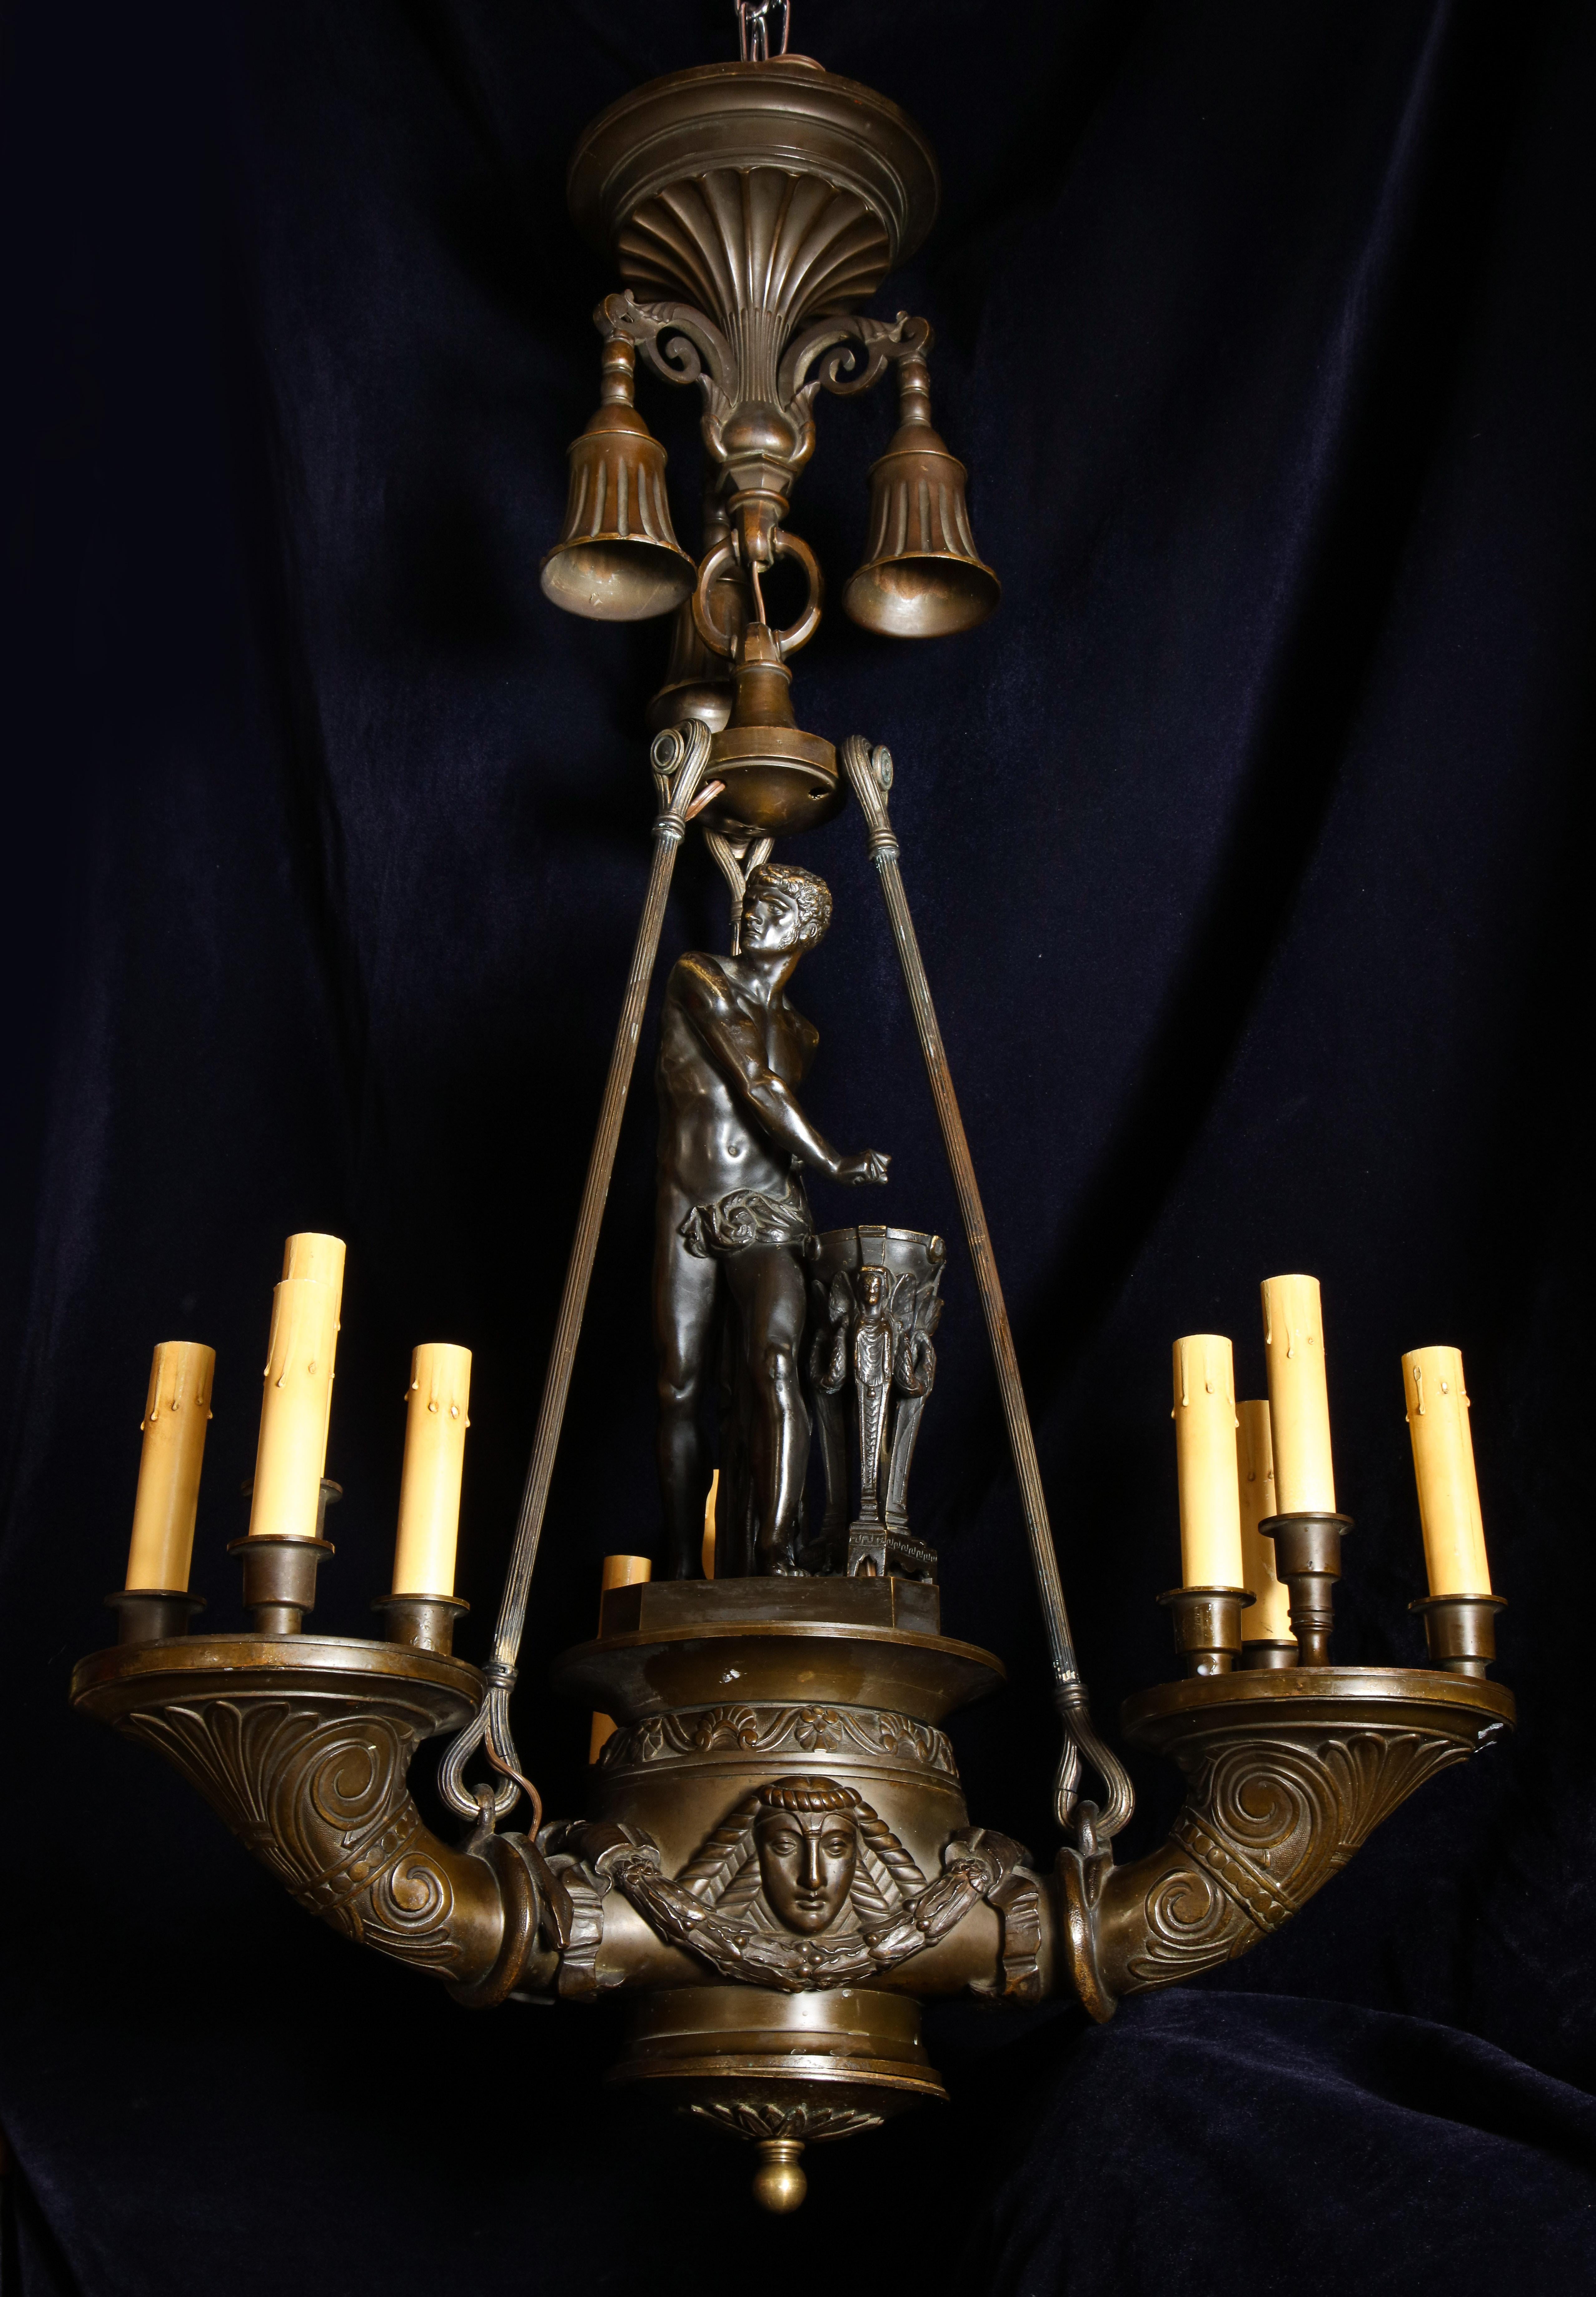 A spectacular and large antique Italian neoclassical patinated bronze multi light figural chandelier of superb detail embellished with a central figure of a neoclassical man and further adorned with neoclassical figural masks.